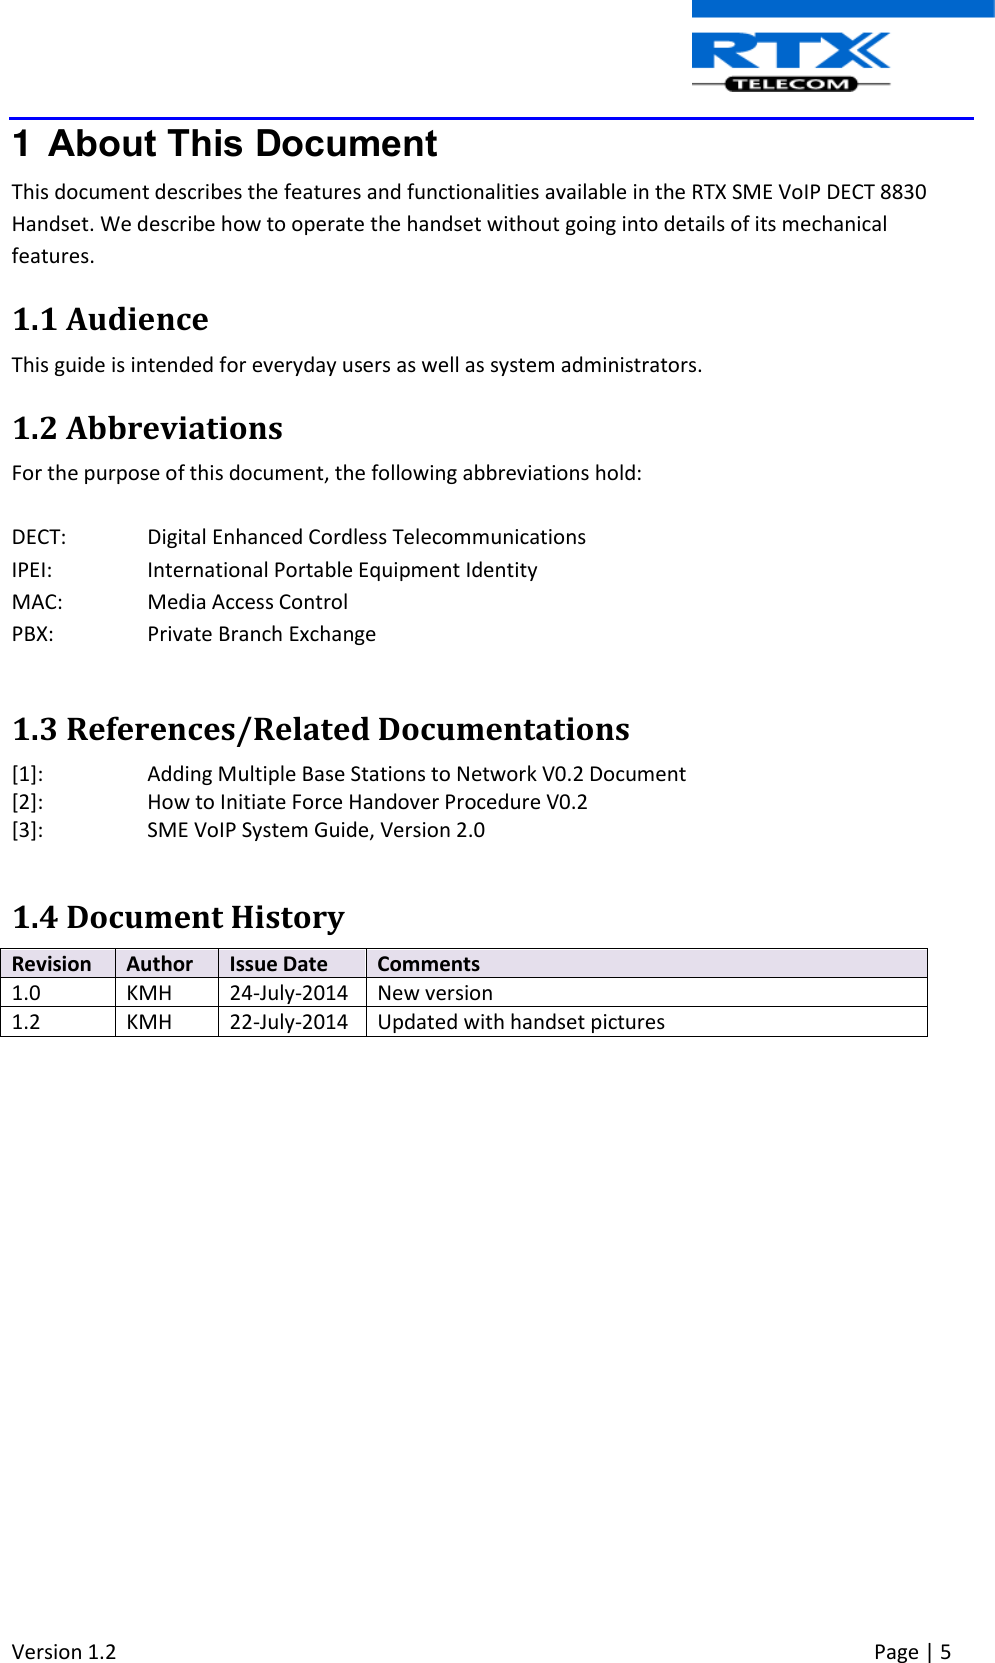  Version 1.2     Page | 5   1  About This Document This document describes the features and functionalities available in the RTX SME VoIP DECT 8830 Handset. We describe how to operate the handset without going into details of its mechanical features.  1.1 Audience This guide is intended for everyday users as well as system administrators. 1.2 Abbreviations For the purpose of this document, the following abbreviations hold:  DECT:  Digital Enhanced Cordless Telecommunications IPEI:   International Portable Equipment Identity MAC: Media Access Control PBX:  Private Branch Exchange  1.3 References/Related Documentations [1]:  Adding Multiple Base Stations to Network V0.2 Document  [2]:   How to Initiate Force Handover Procedure V0.2  [3]:  SME VoIP System Guide, Version 2.0  1.4 Document History Revision Author Issue Date Comments 1.0 KMH 24-July-2014 New version 1.2 KMH 22-July-2014 Updated with handset pictures             